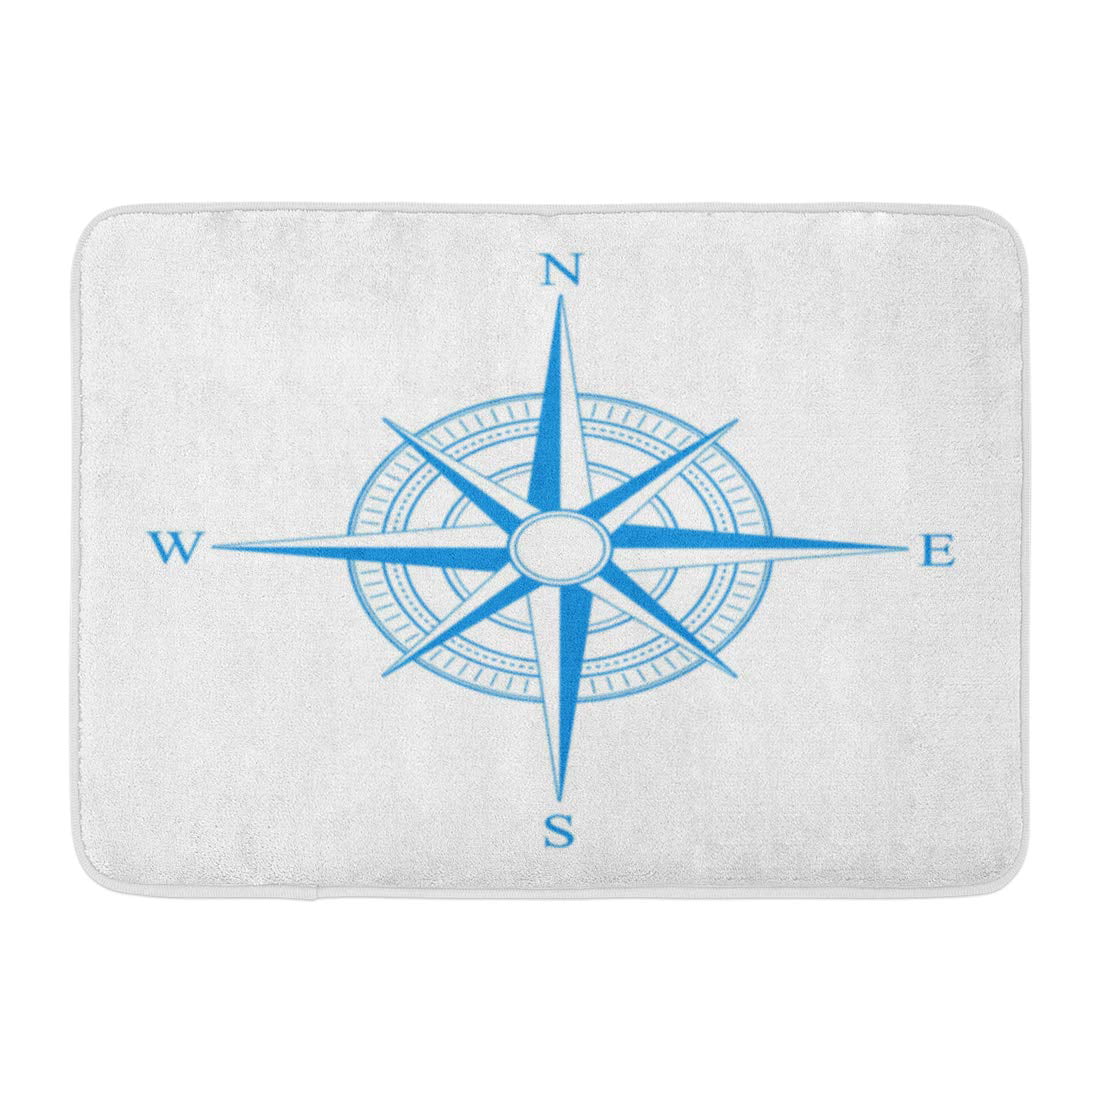 Non-Slip Comfort Office Standing Cushioned Rug Home Decor Indoor Outdoor Vintage Nautical Anchor Lighthouse Compass Kitchen Floor Mat 39 x 20 